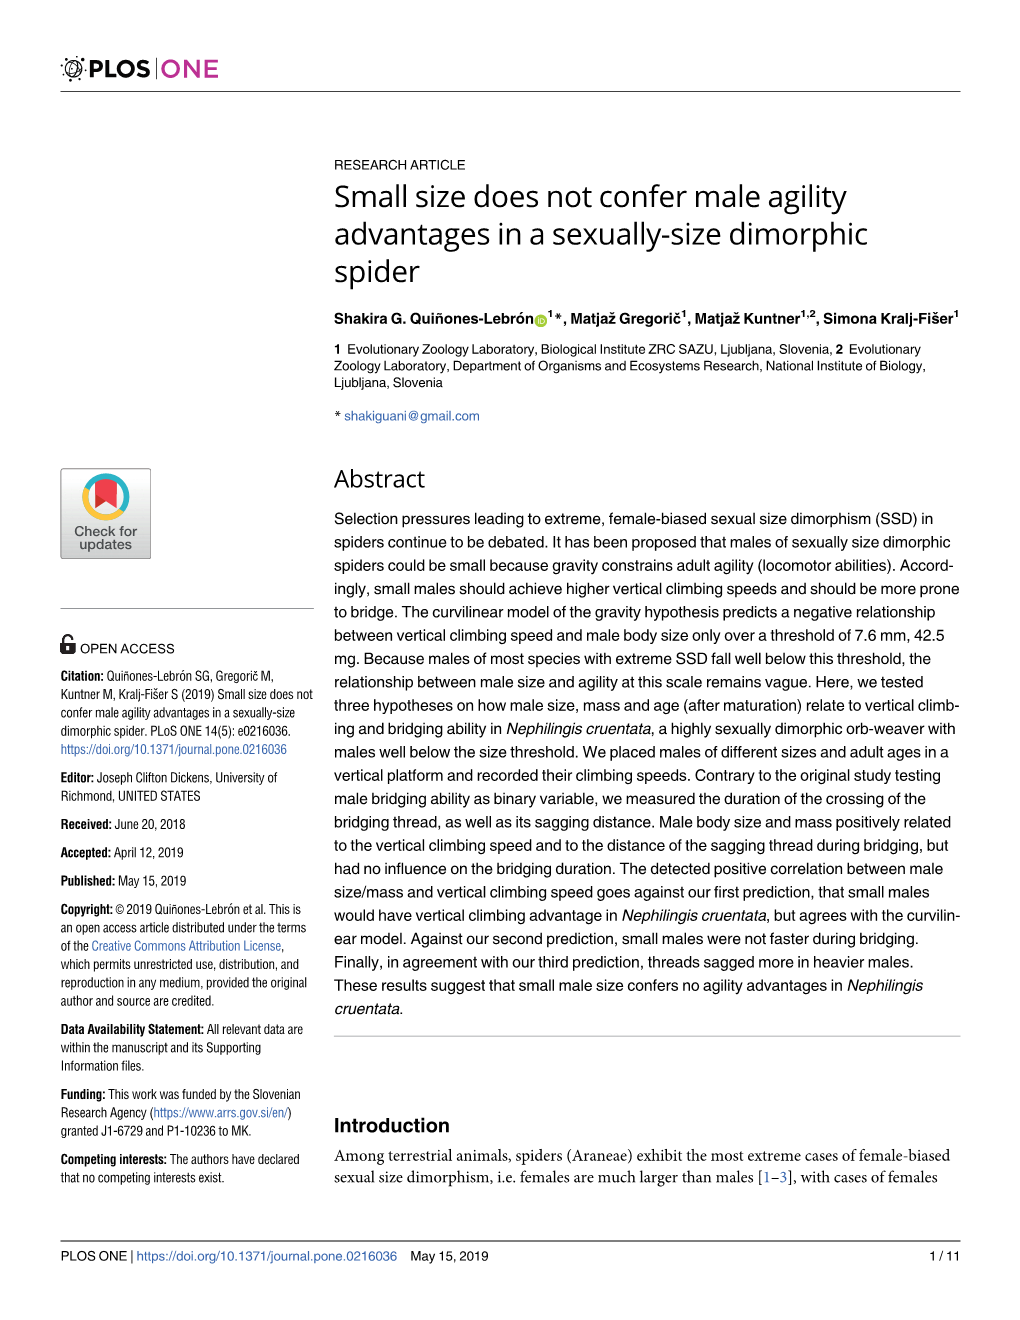 Small Size Does Not Confer Male Agility Advantages in a Sexually-Size Dimorphic Spider